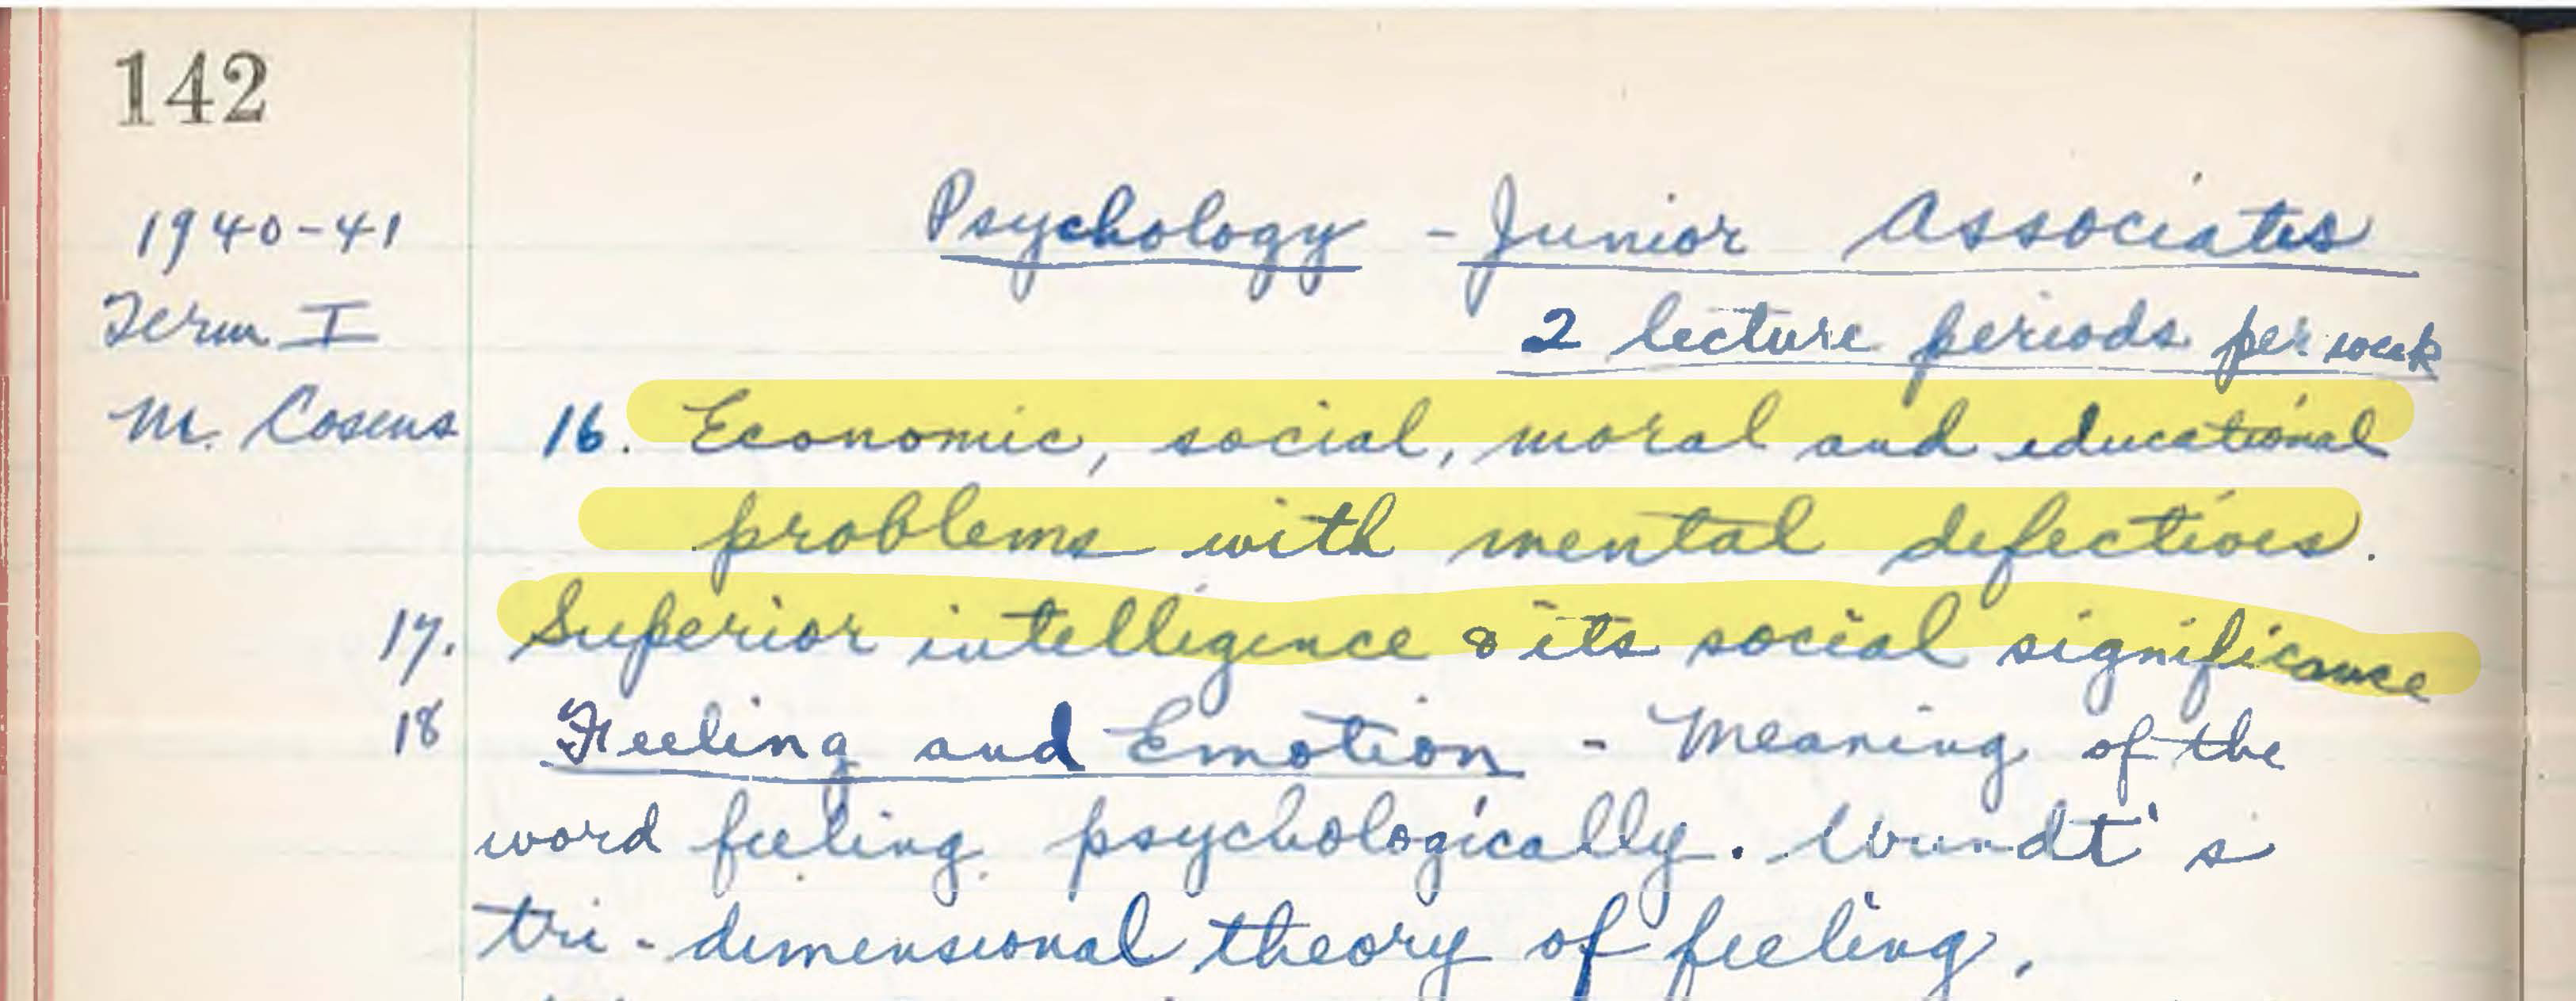 Macdonald Institute Psychology course outline, 1940-1940. The course includes lessons on eugenics intelligence testing and classifications and the “economic, social, moral, and educational problems with mental defectives.”